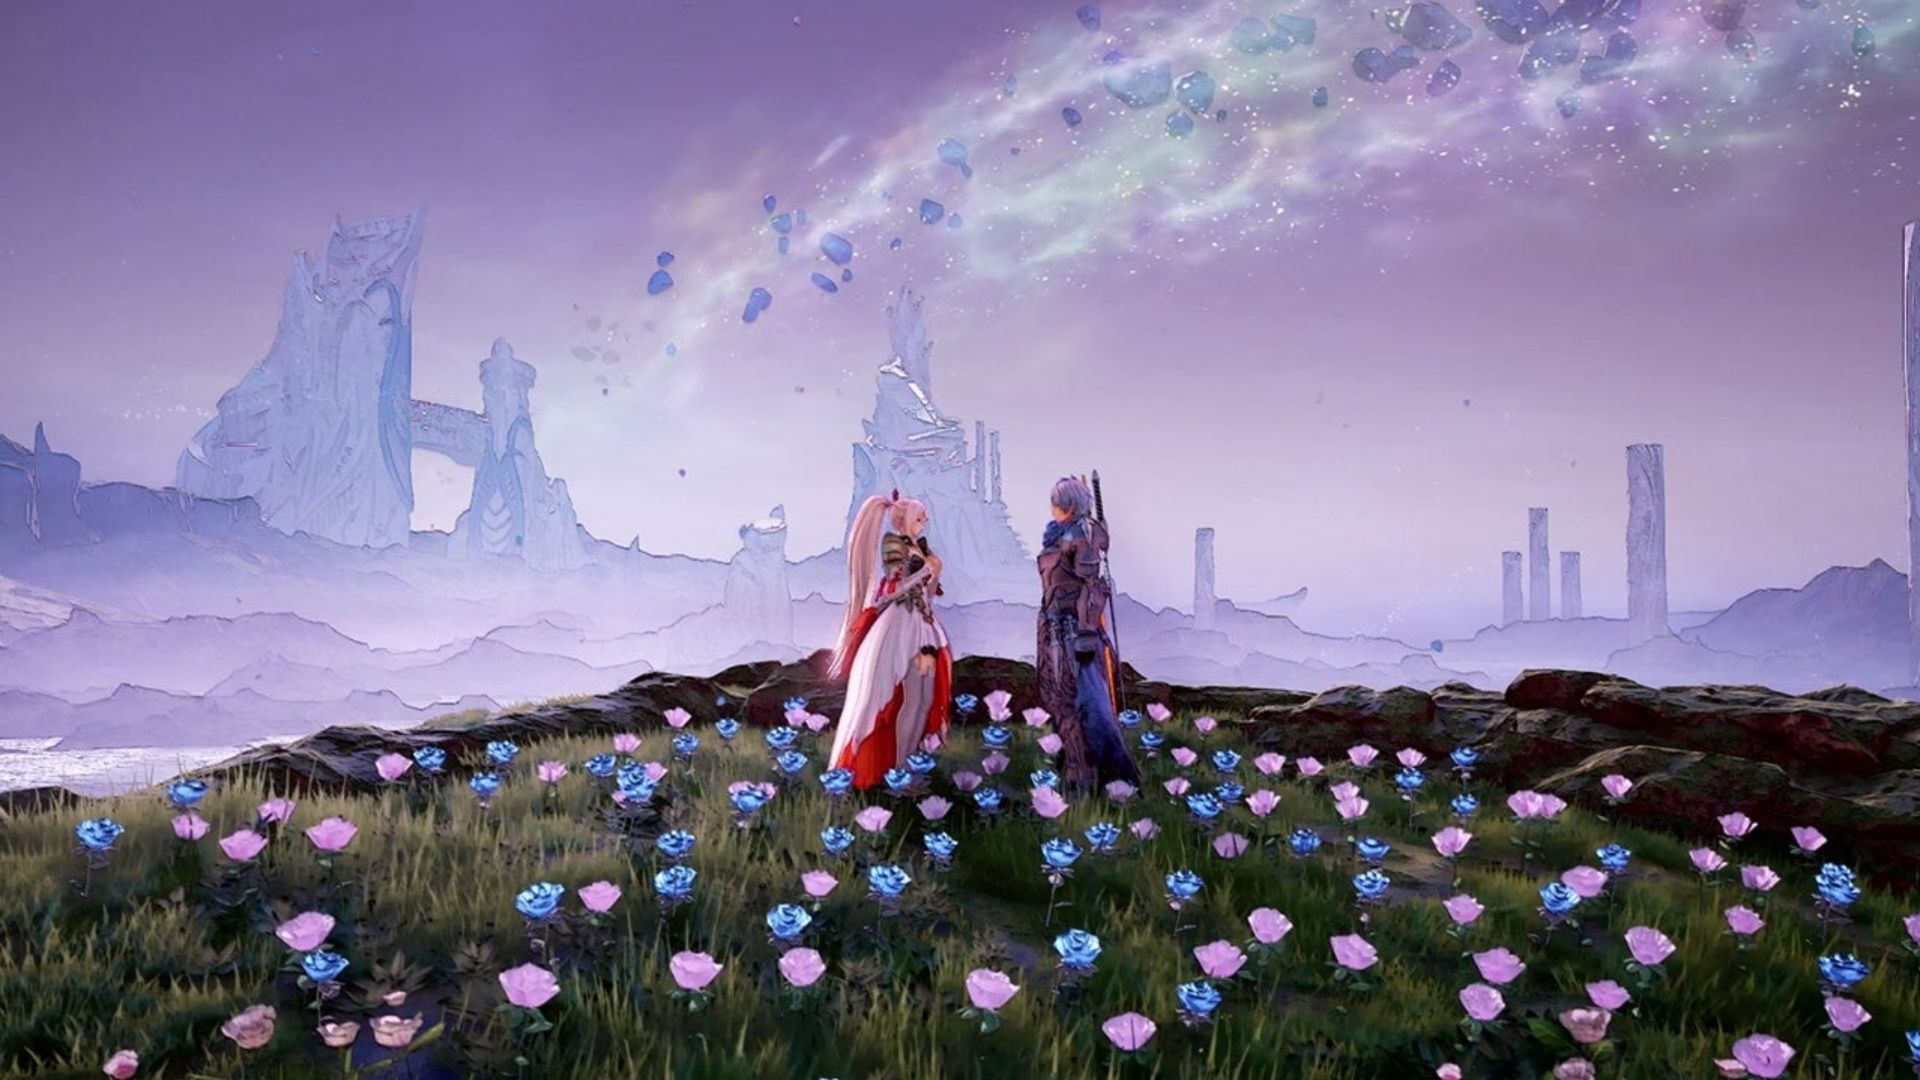 Alphen and Shionne in Tales of Arise: Beyond the Dawn